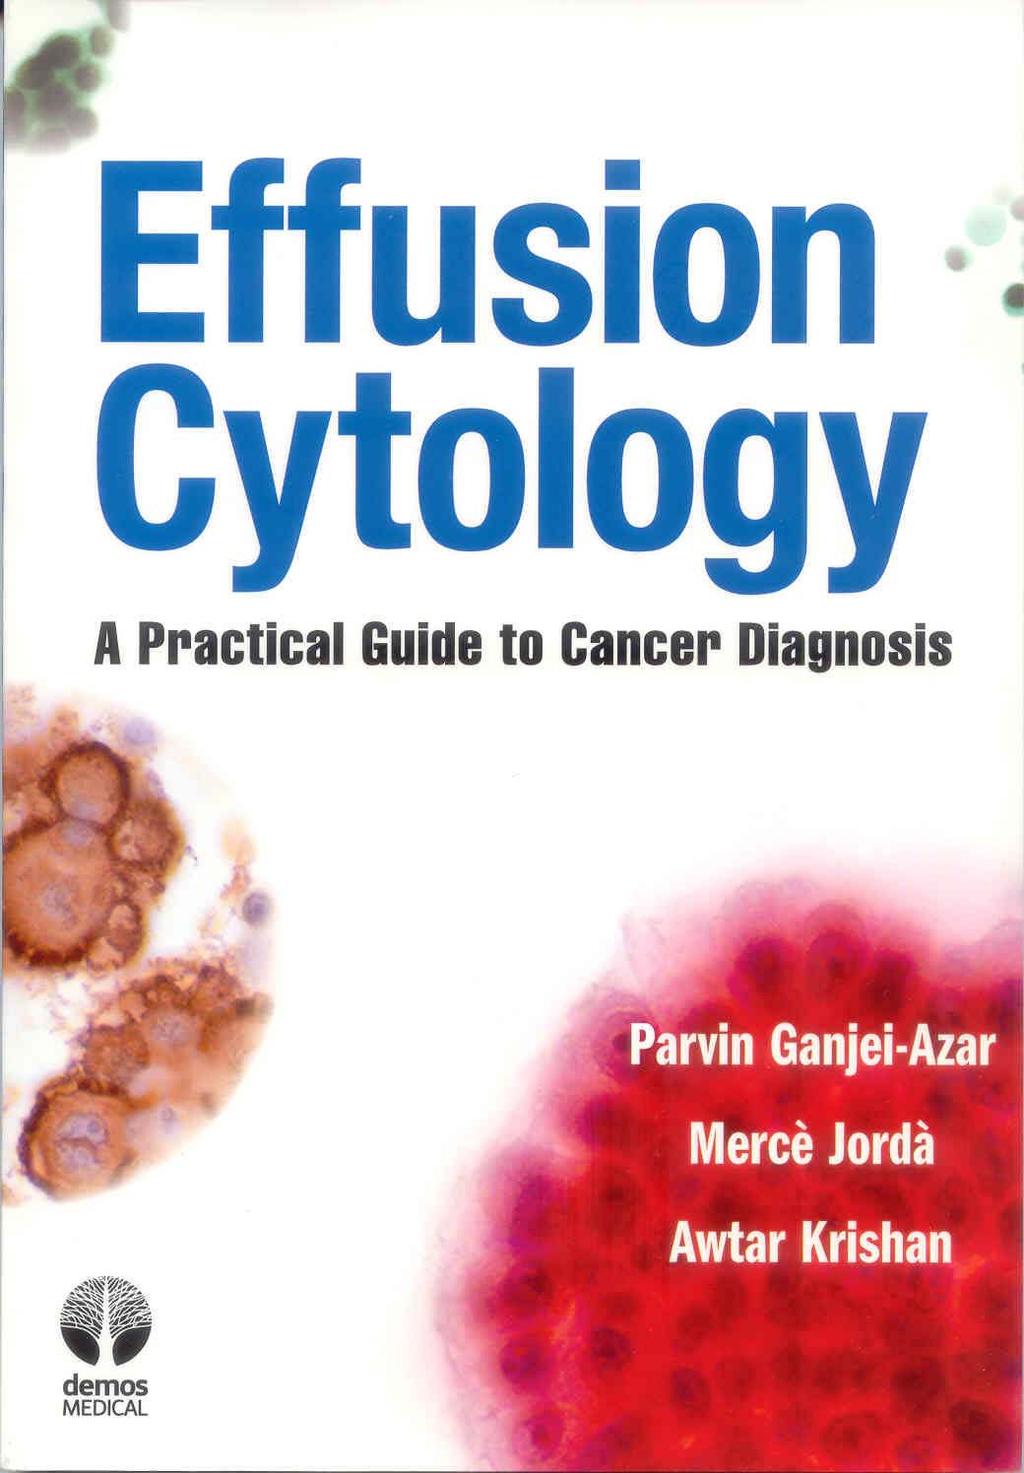 Diagnostic Cytology of Body Cavity Fluids Cellular patterns and morphological characteristics of the individual cells.